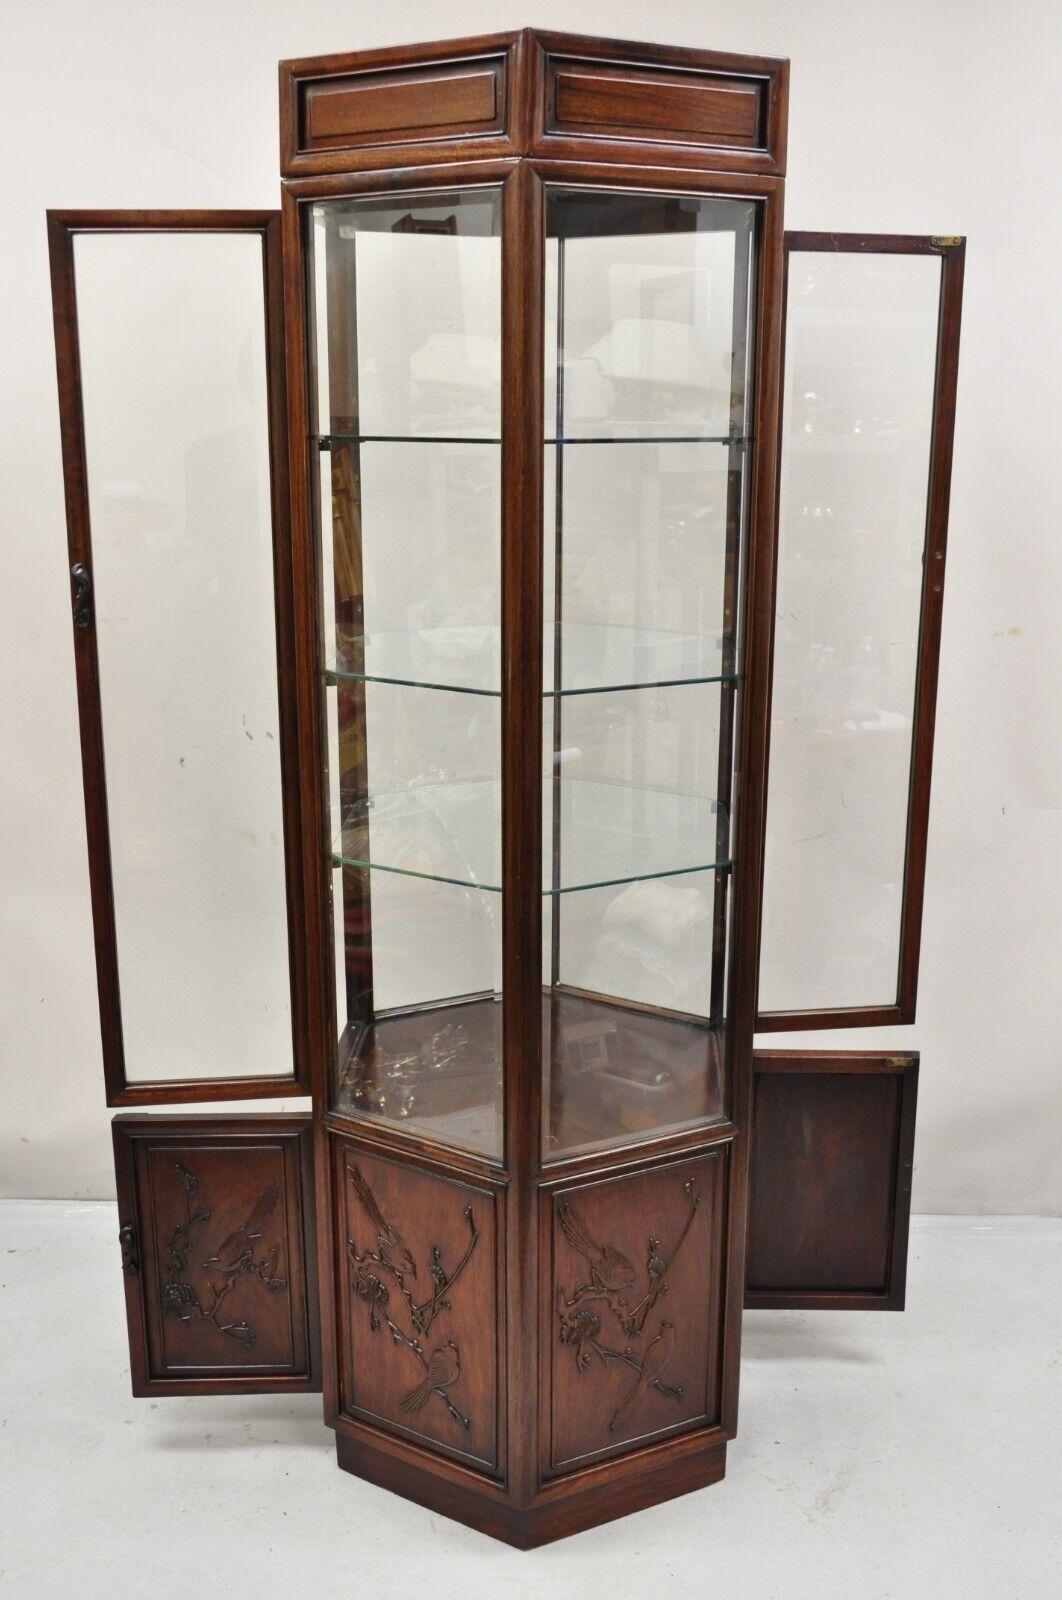 Vintage Oriental Chinoiserie Asian Mahogany Hexagonal Lighted Display Curio Cabinet. Item features double sided entry and lower cabinets, bird carved details, 3 adjustable glass shelves, lighted interior, beautiful wood grain, very nice vintage